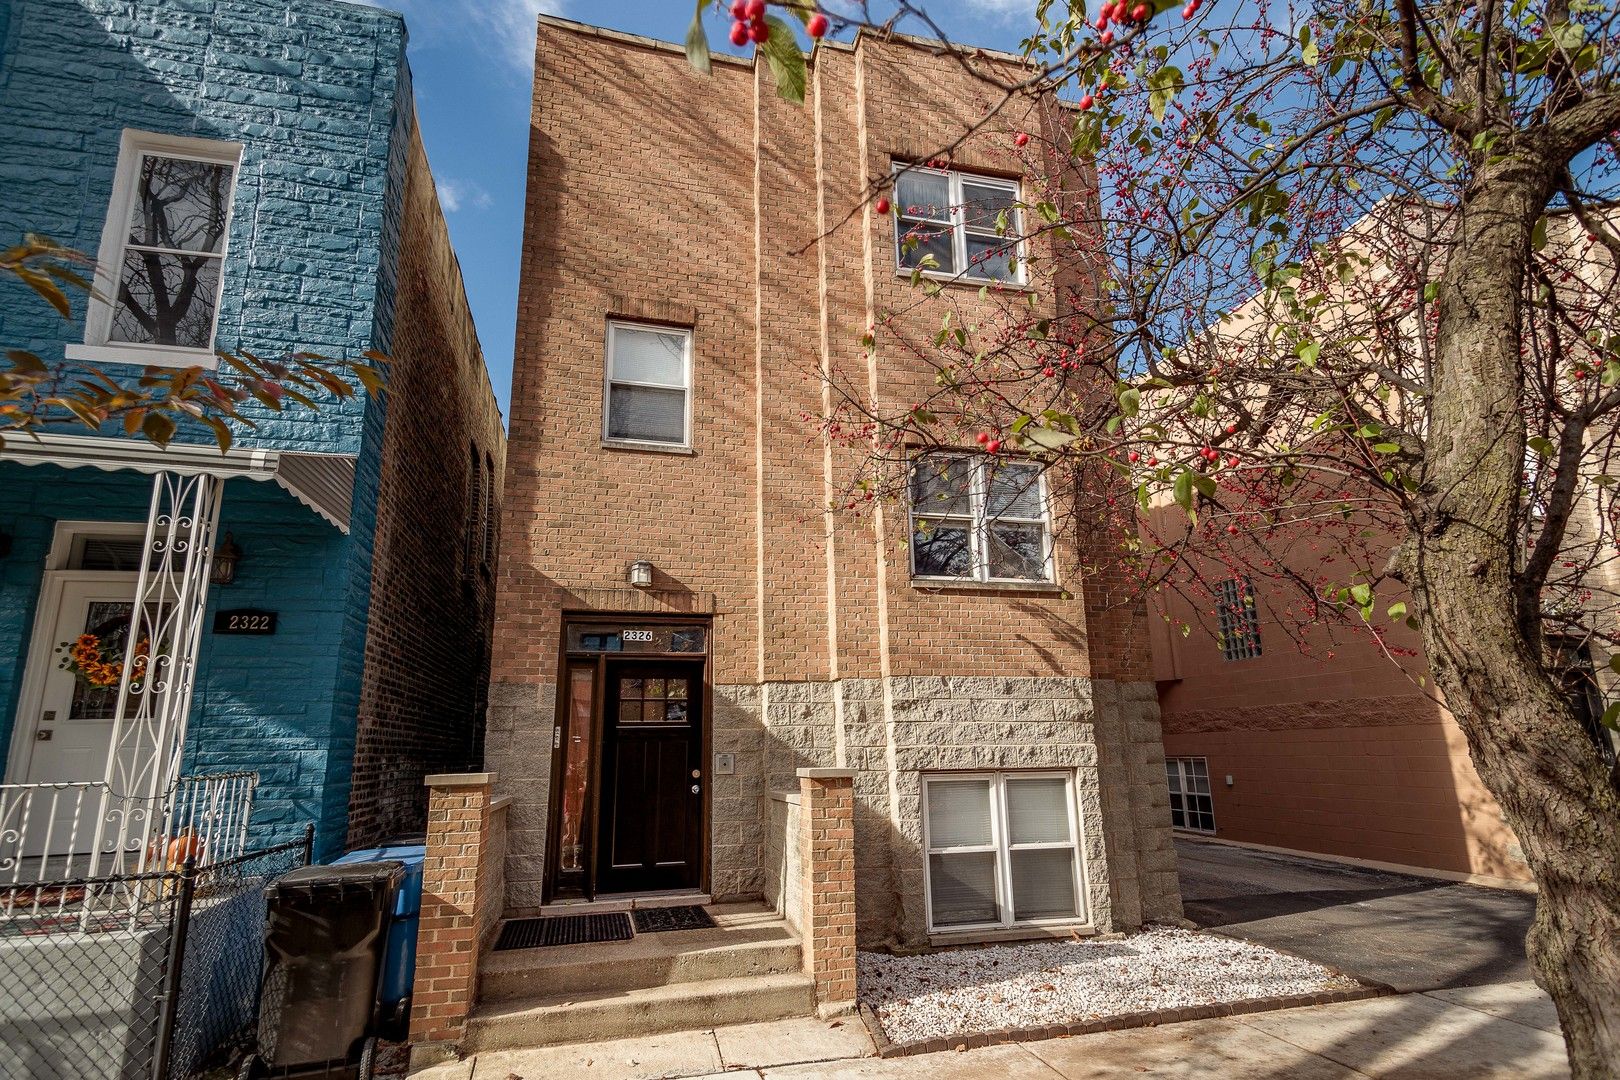 Main Photo: 2326 N Rockwell Street Unit 1 in Chicago: CHI - Logan Square Residential Lease for sale ()  : MLS®# 11746775